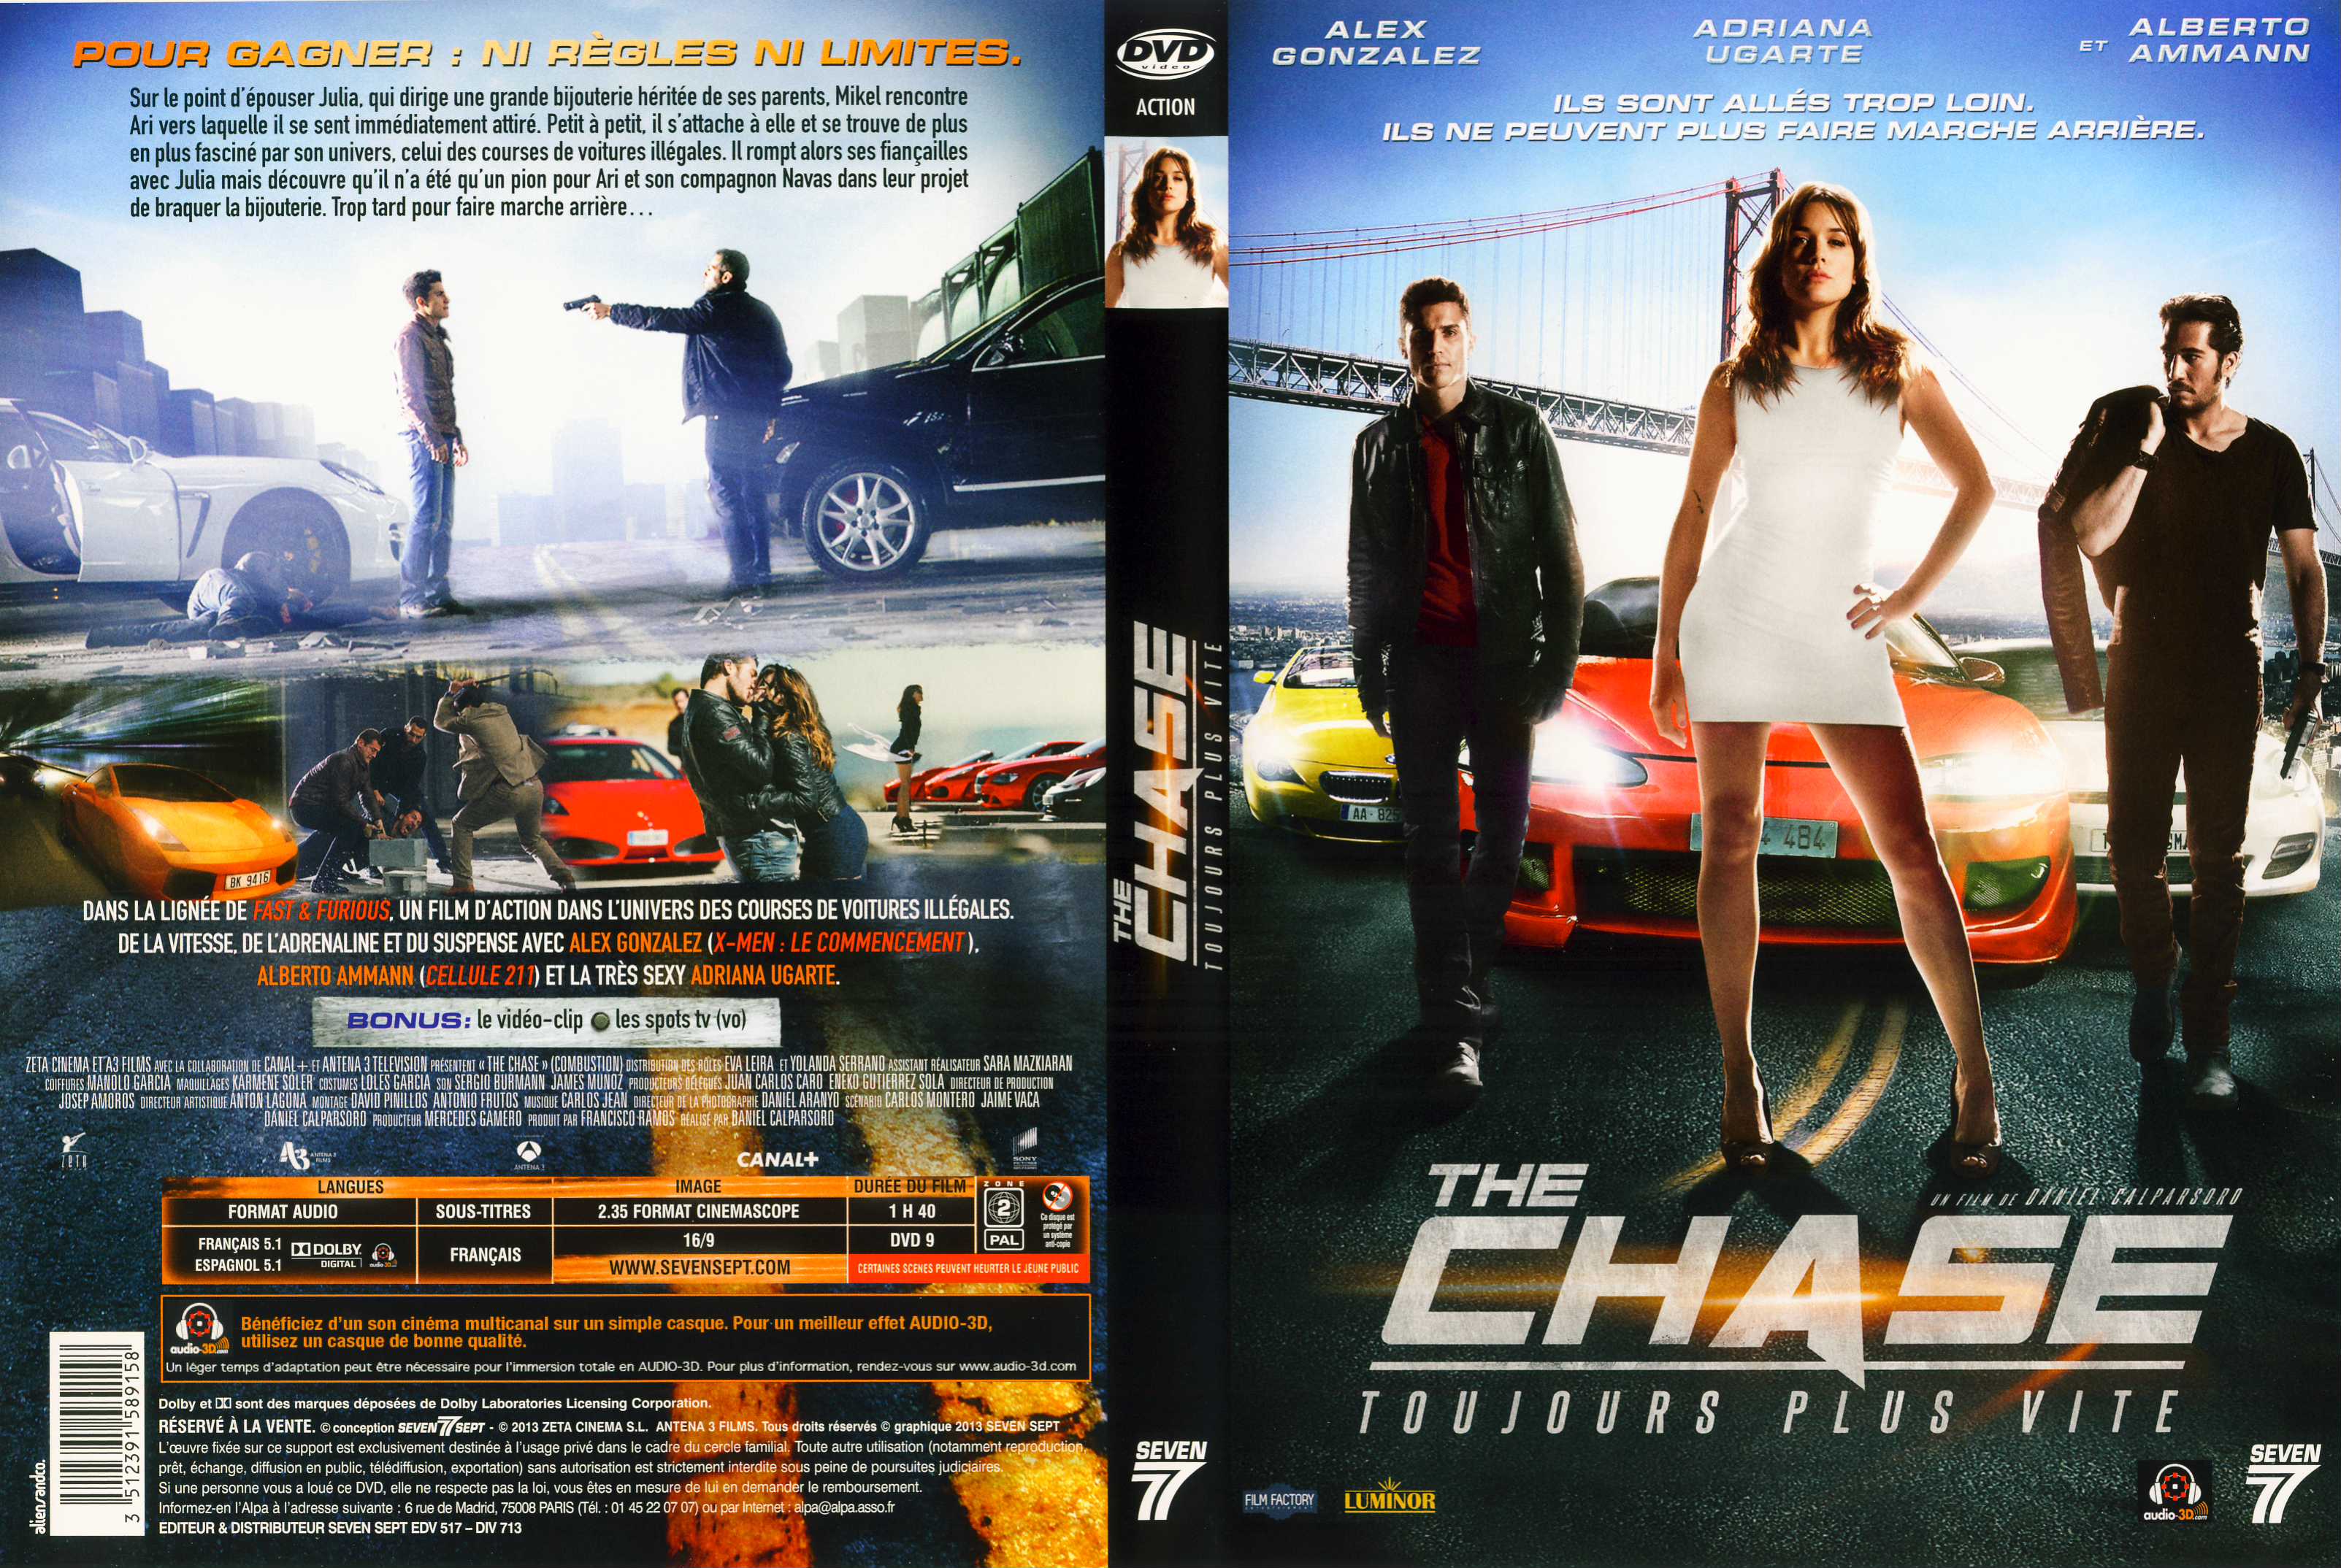 Jaquette DVD The Chase